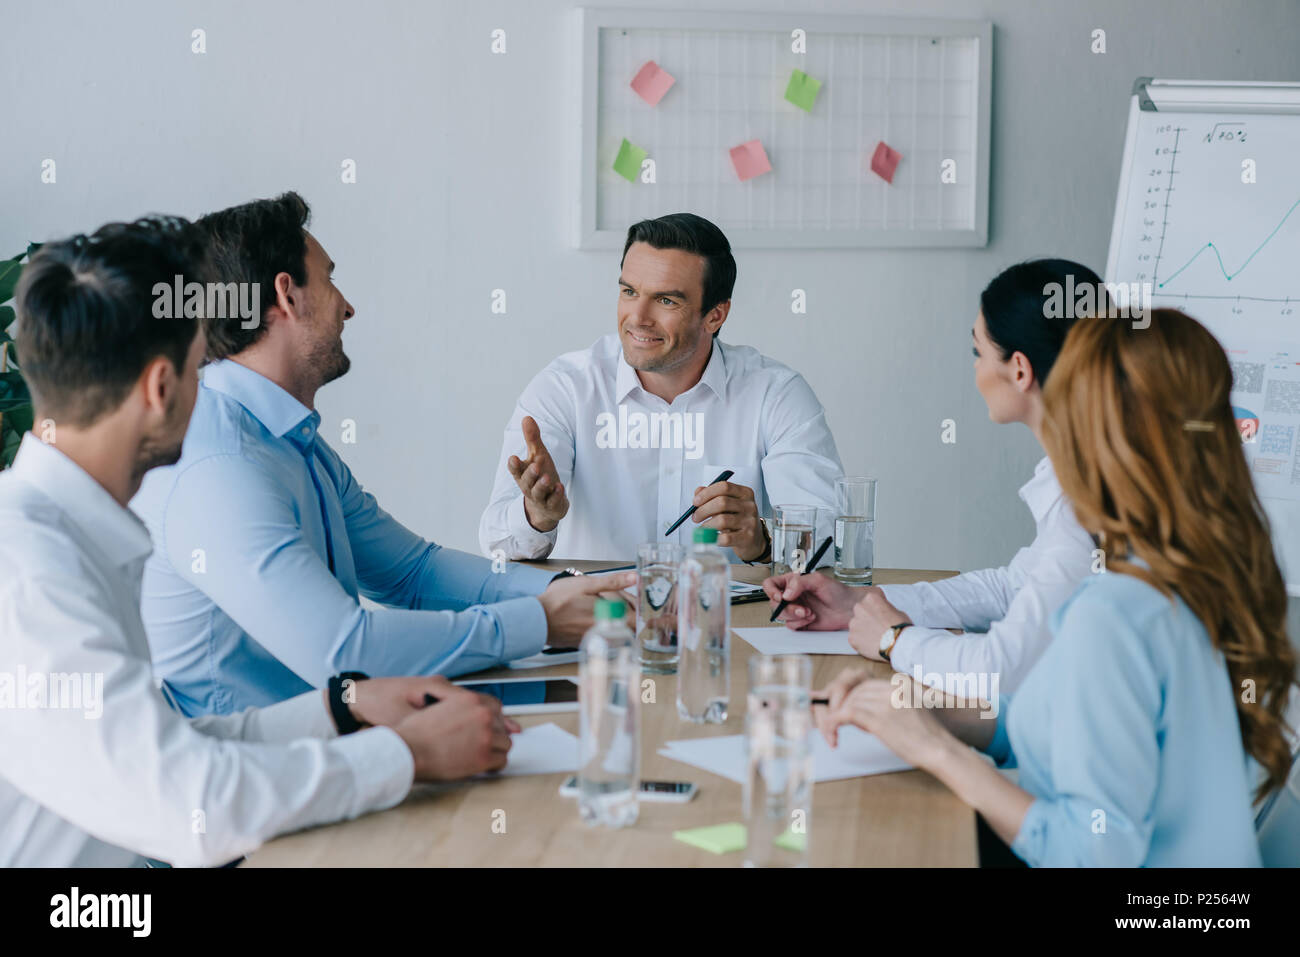 business colleagues having discussion at workplace in office Stock Photo